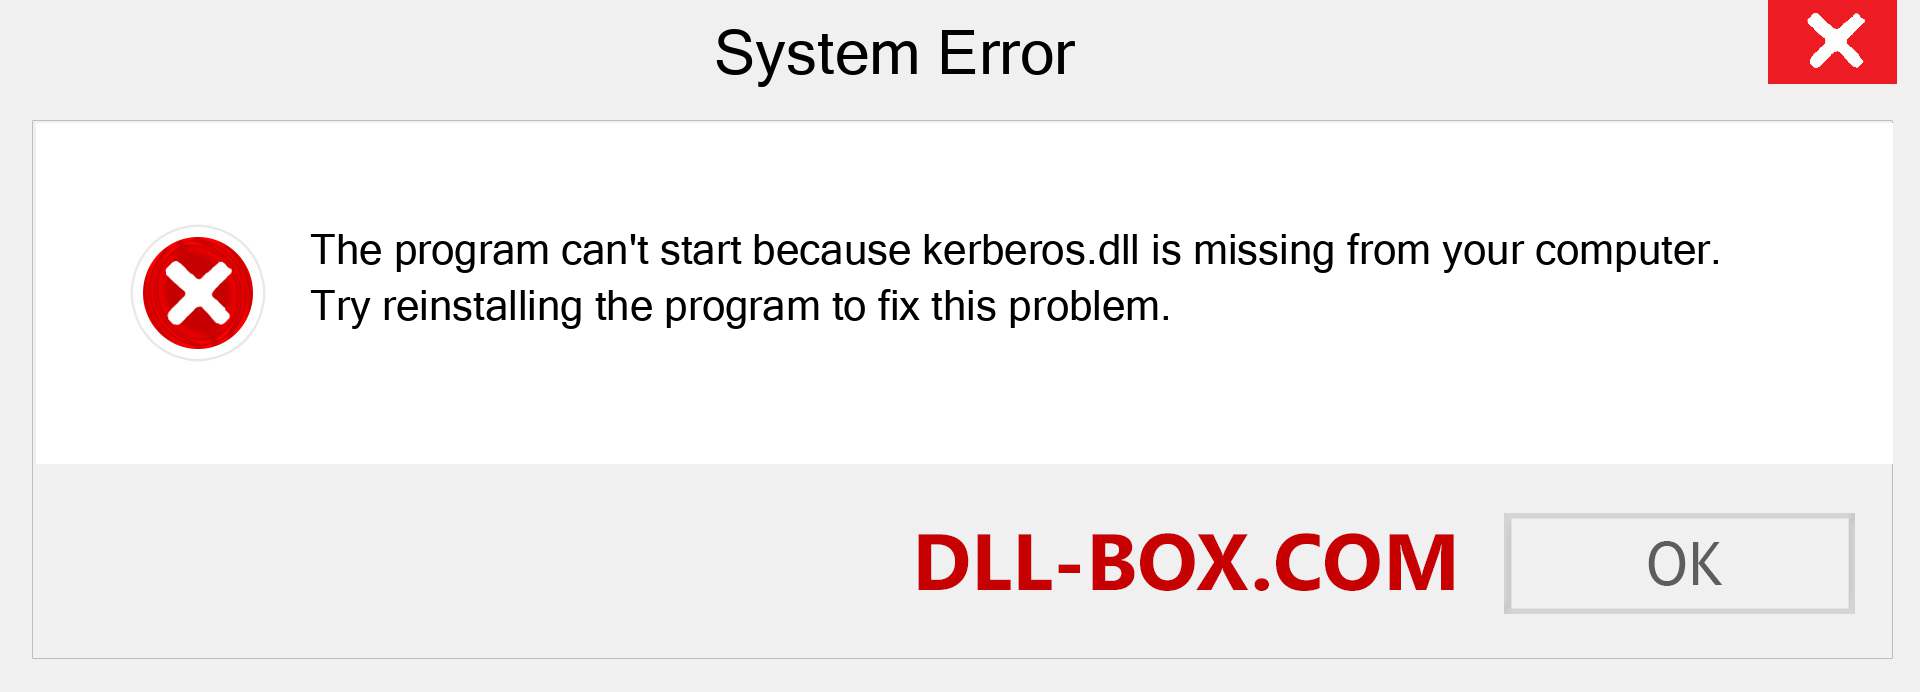  kerberos.dll file is missing?. Download for Windows 7, 8, 10 - Fix  kerberos dll Missing Error on Windows, photos, images